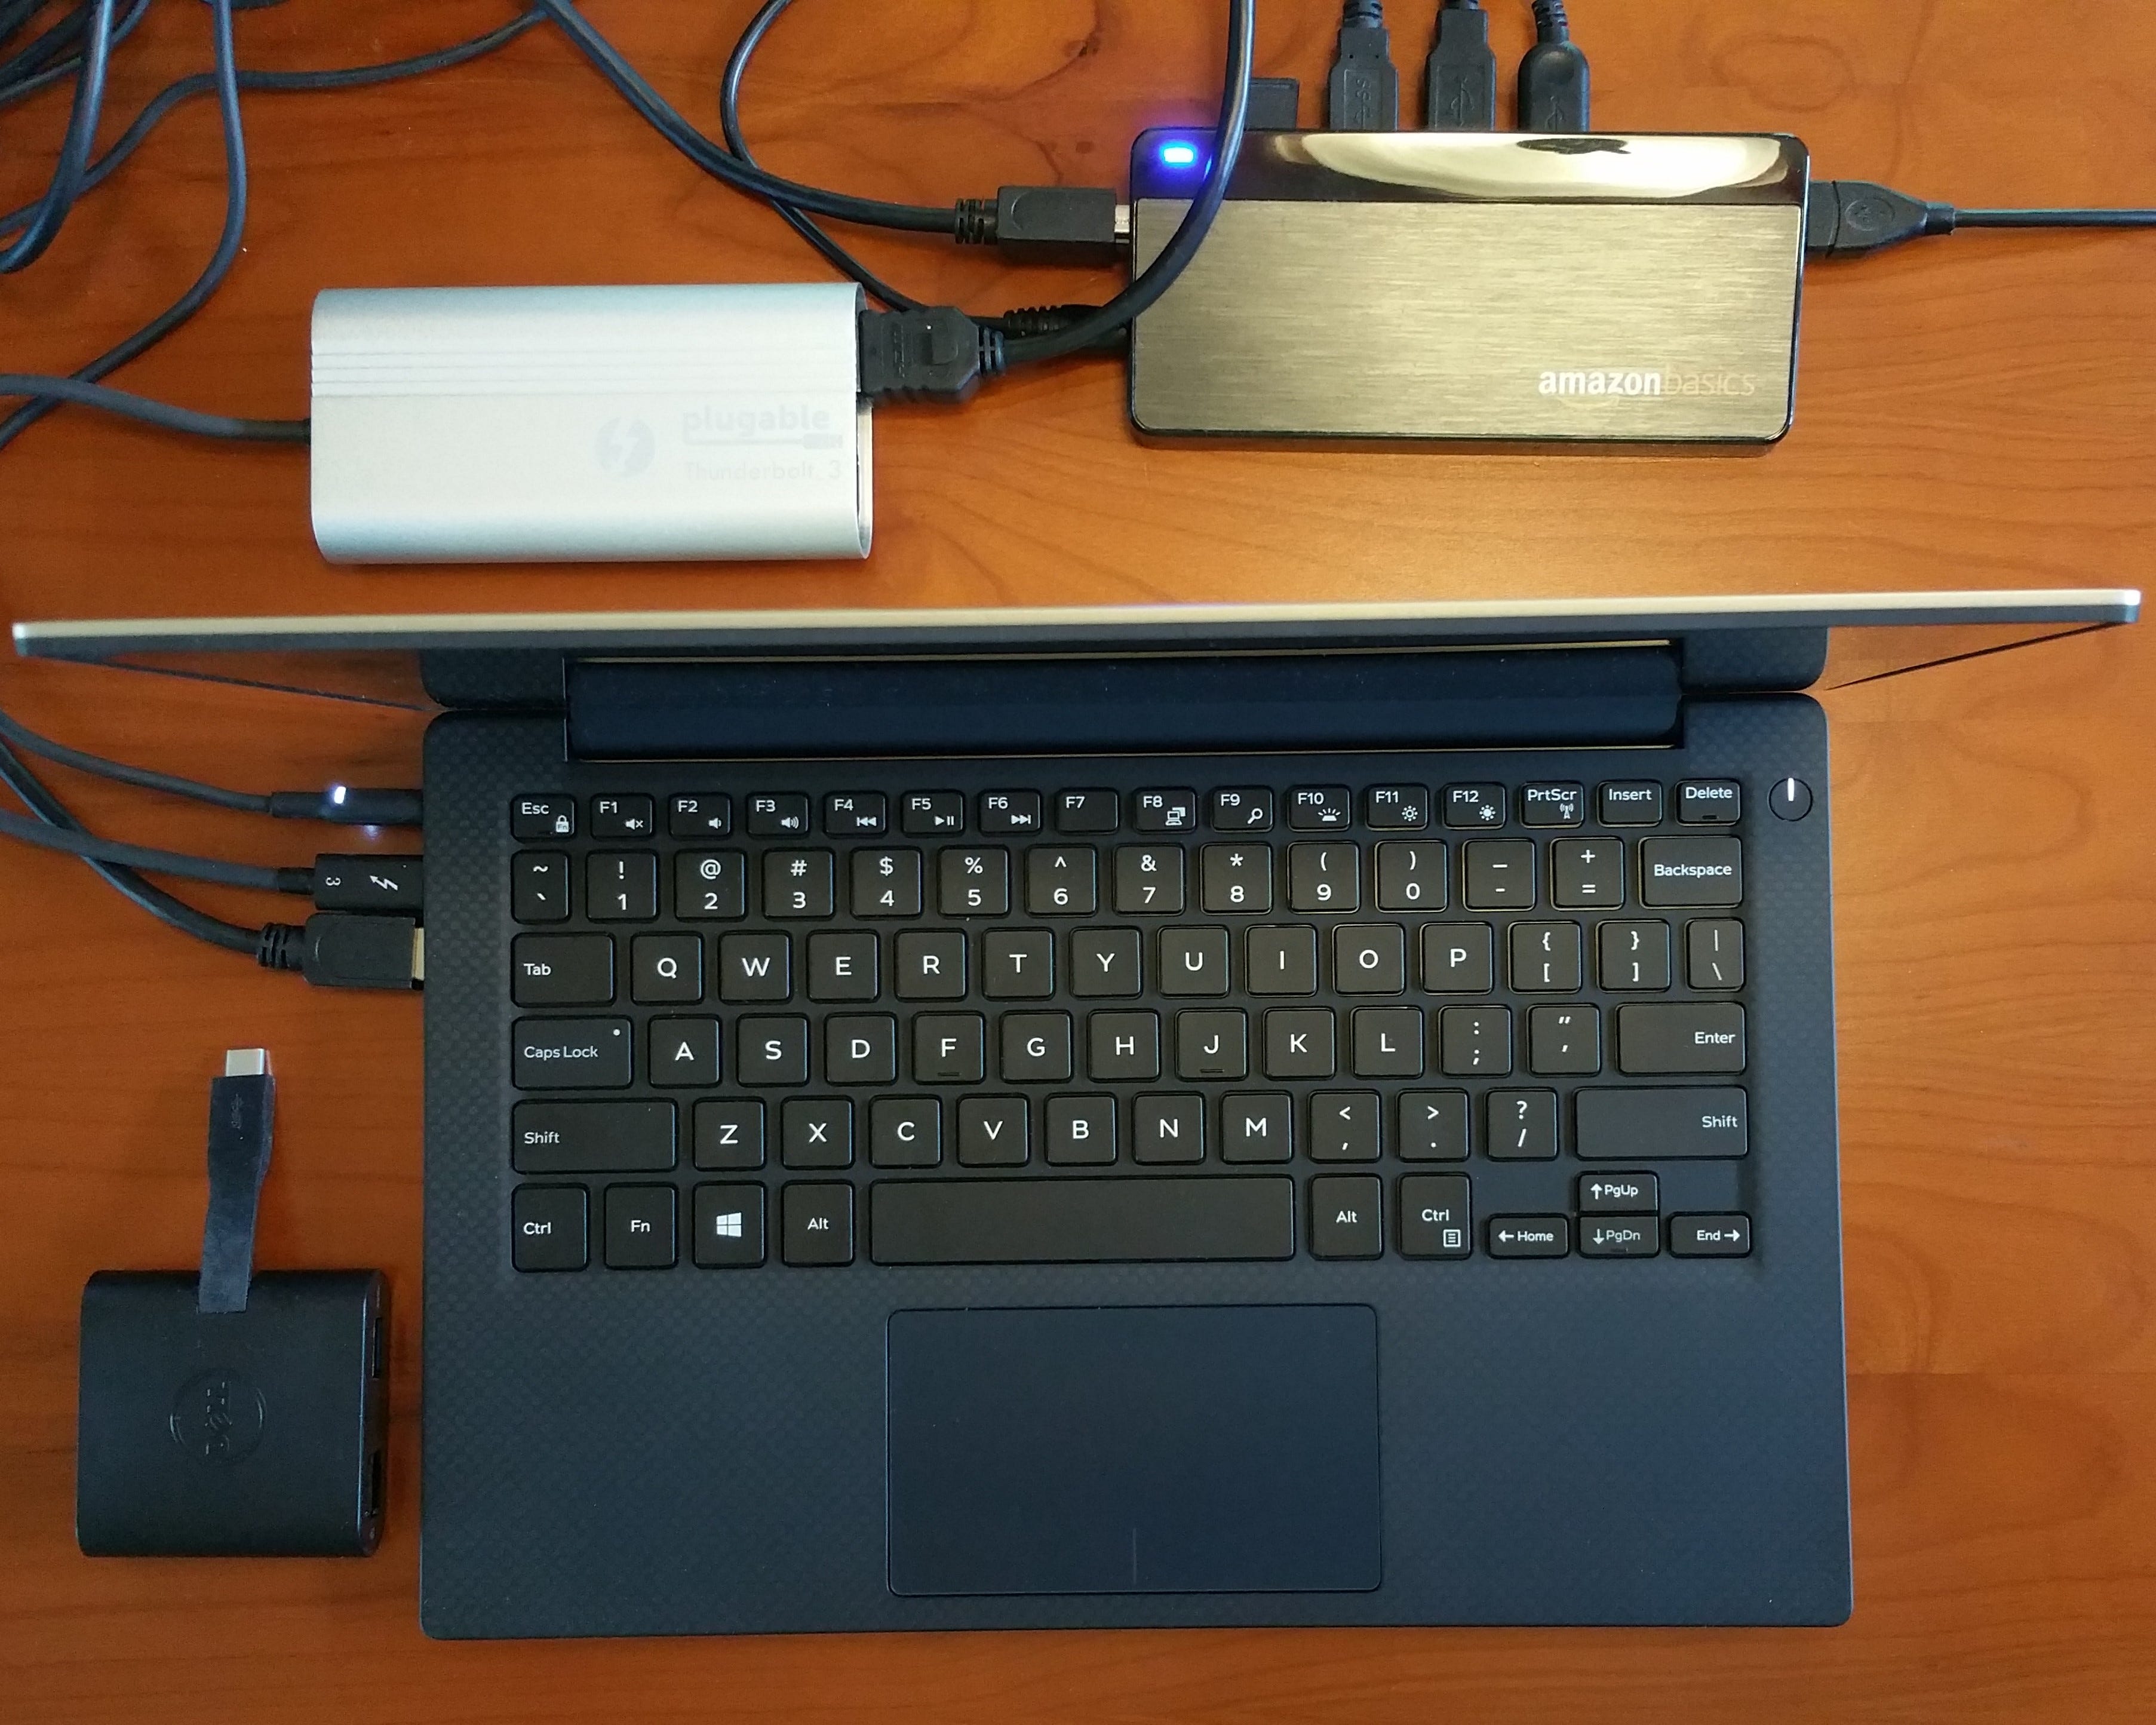 What You Need To Know About Usb C And Thunderbolt 3 By Tirias Research Medium